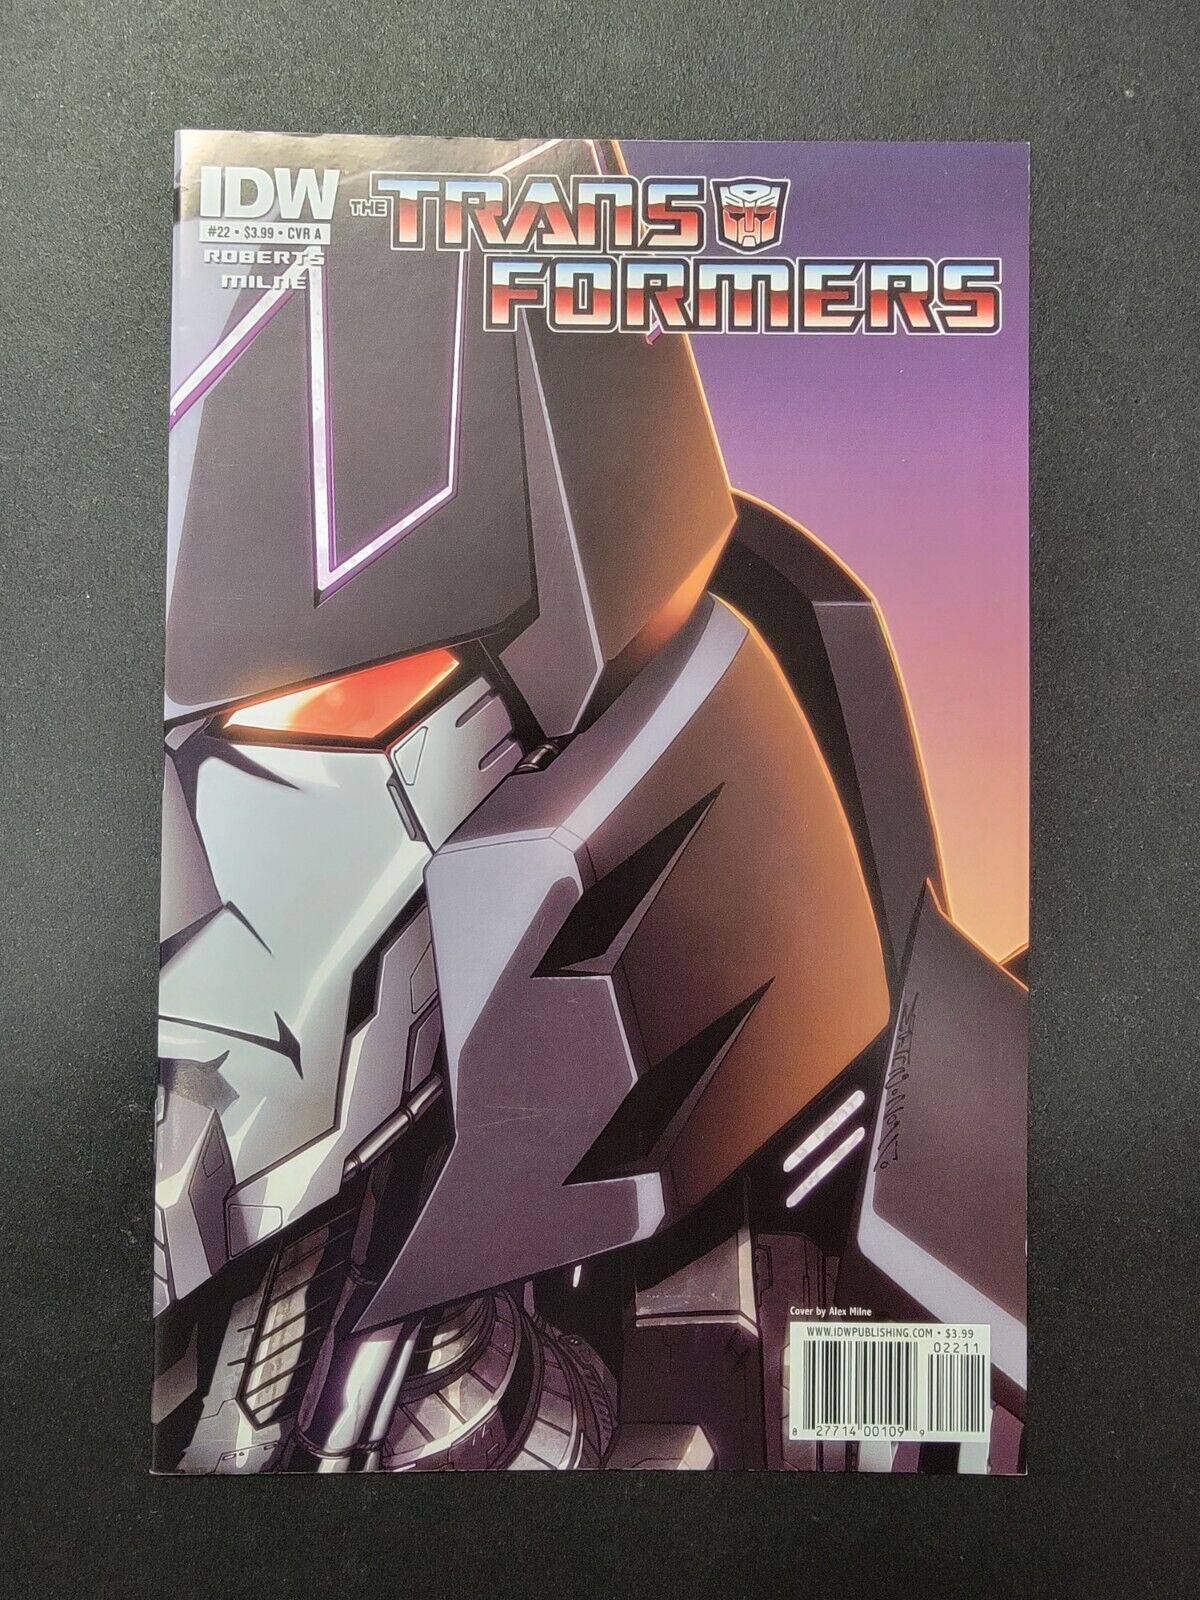 Transformers 22 A (2nd Series) 2011, Connecting Megatron Variant IDW Comics  NM-